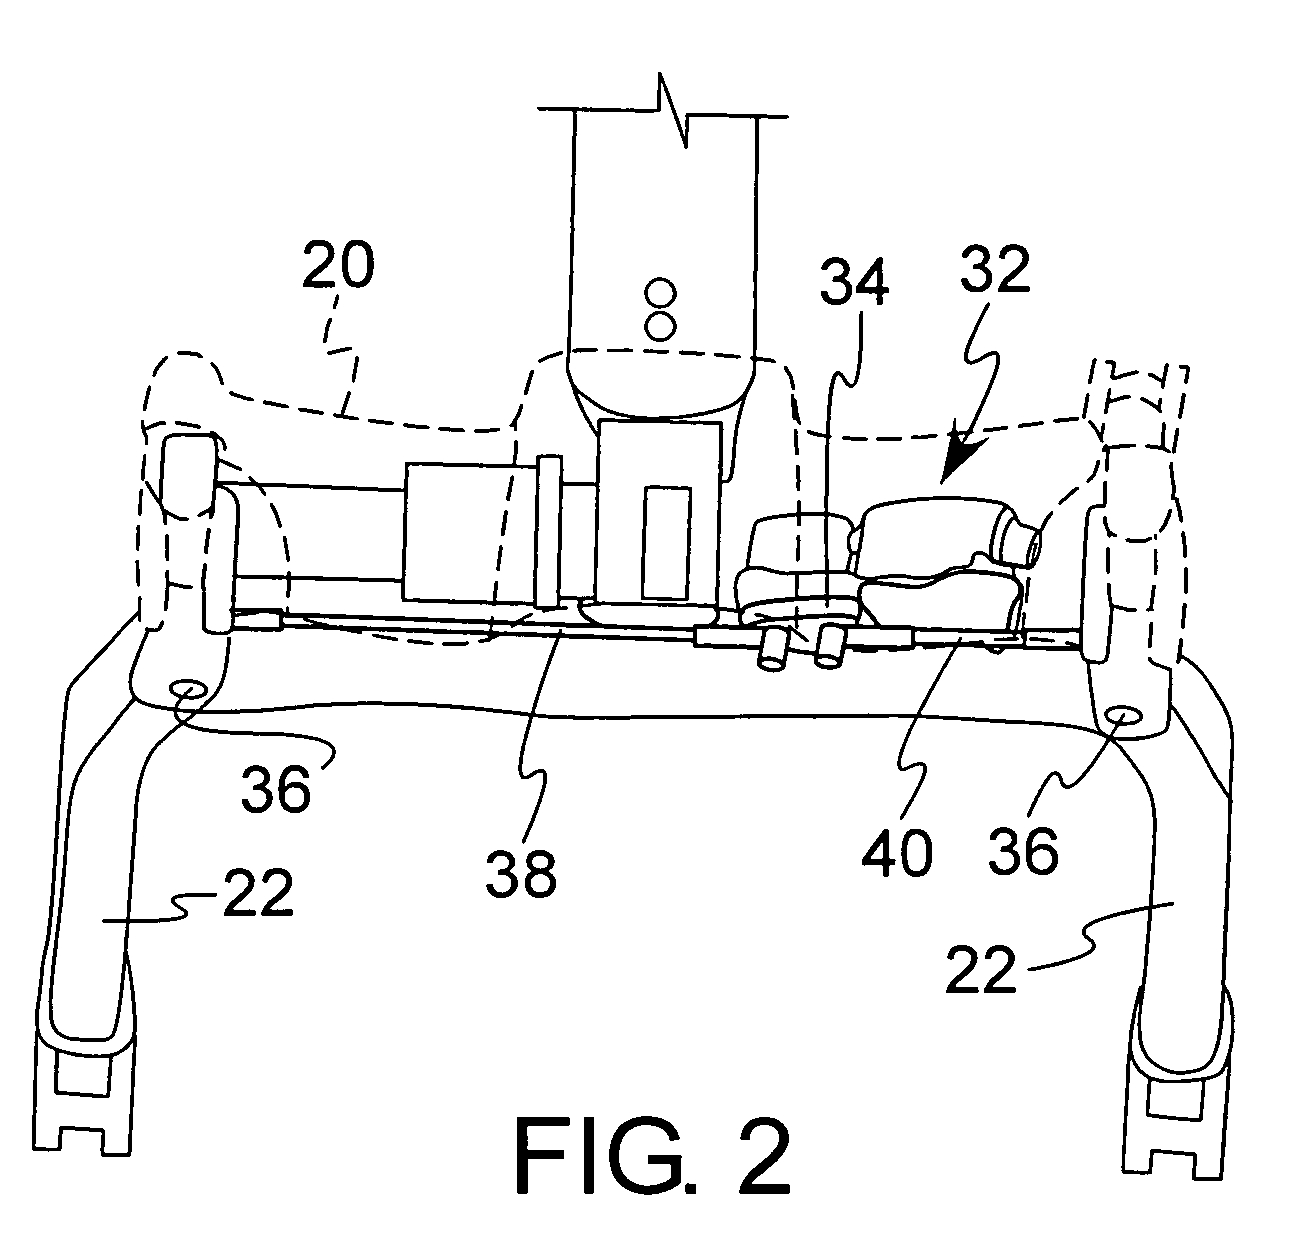 Load sensing safety device for vertical lift